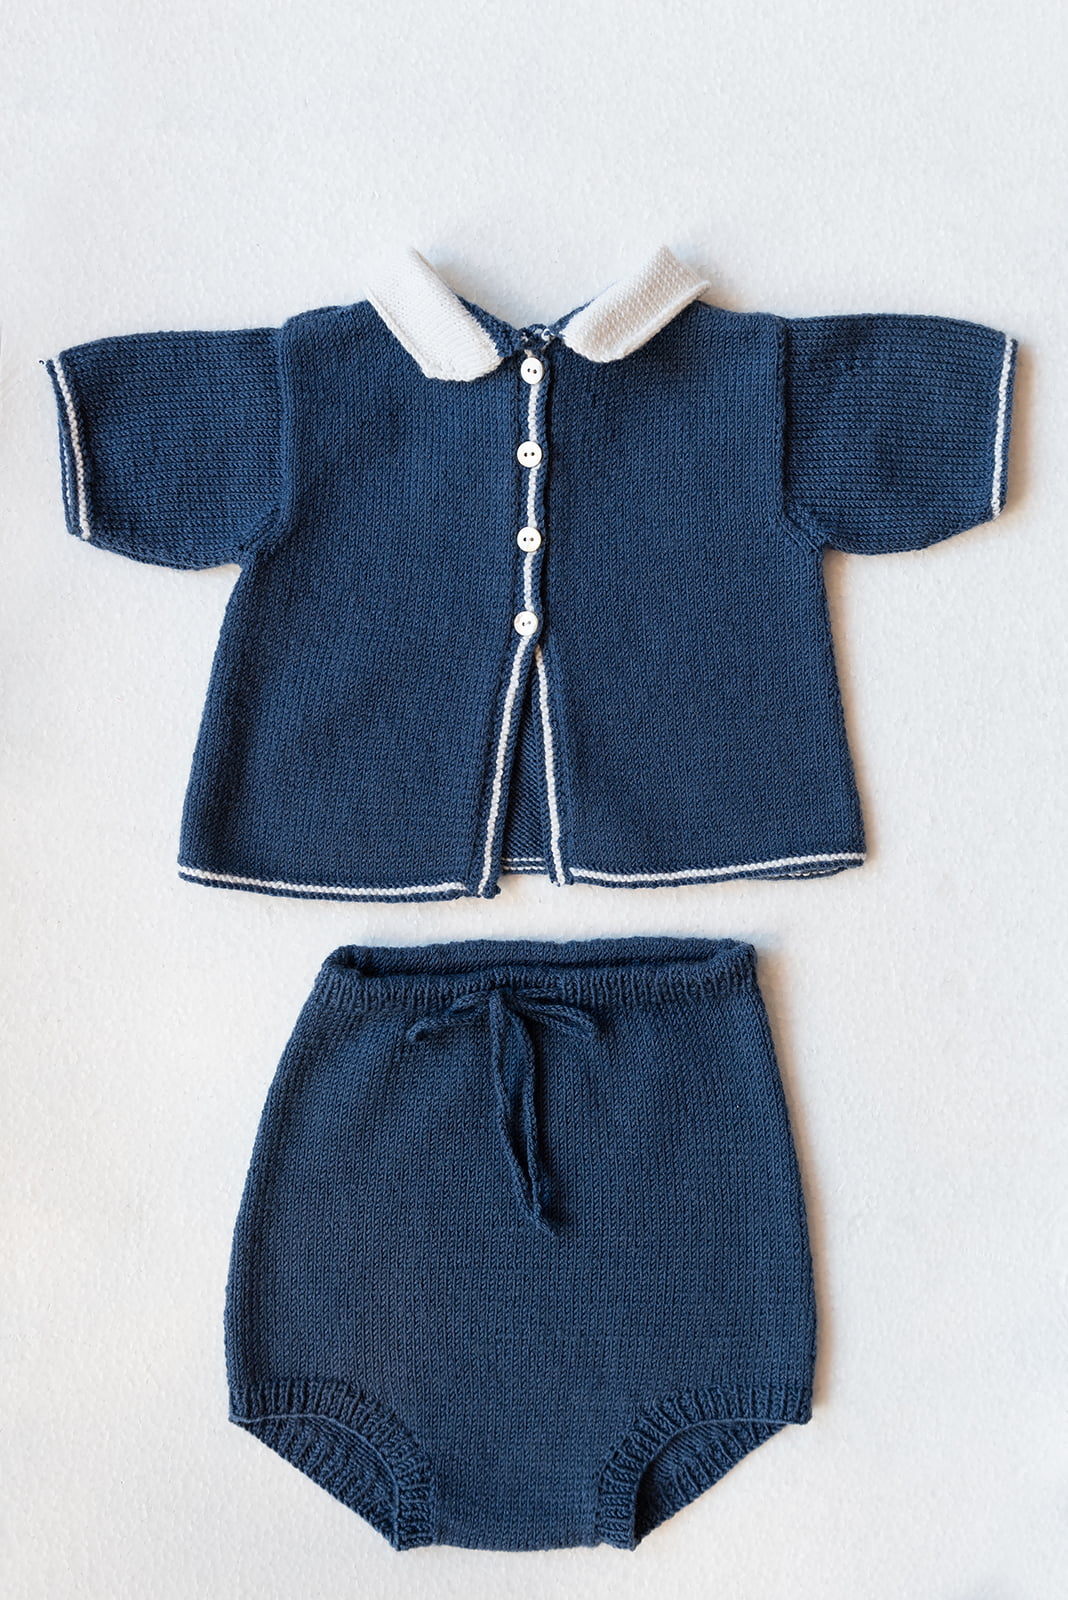 Knitted Romper Suits